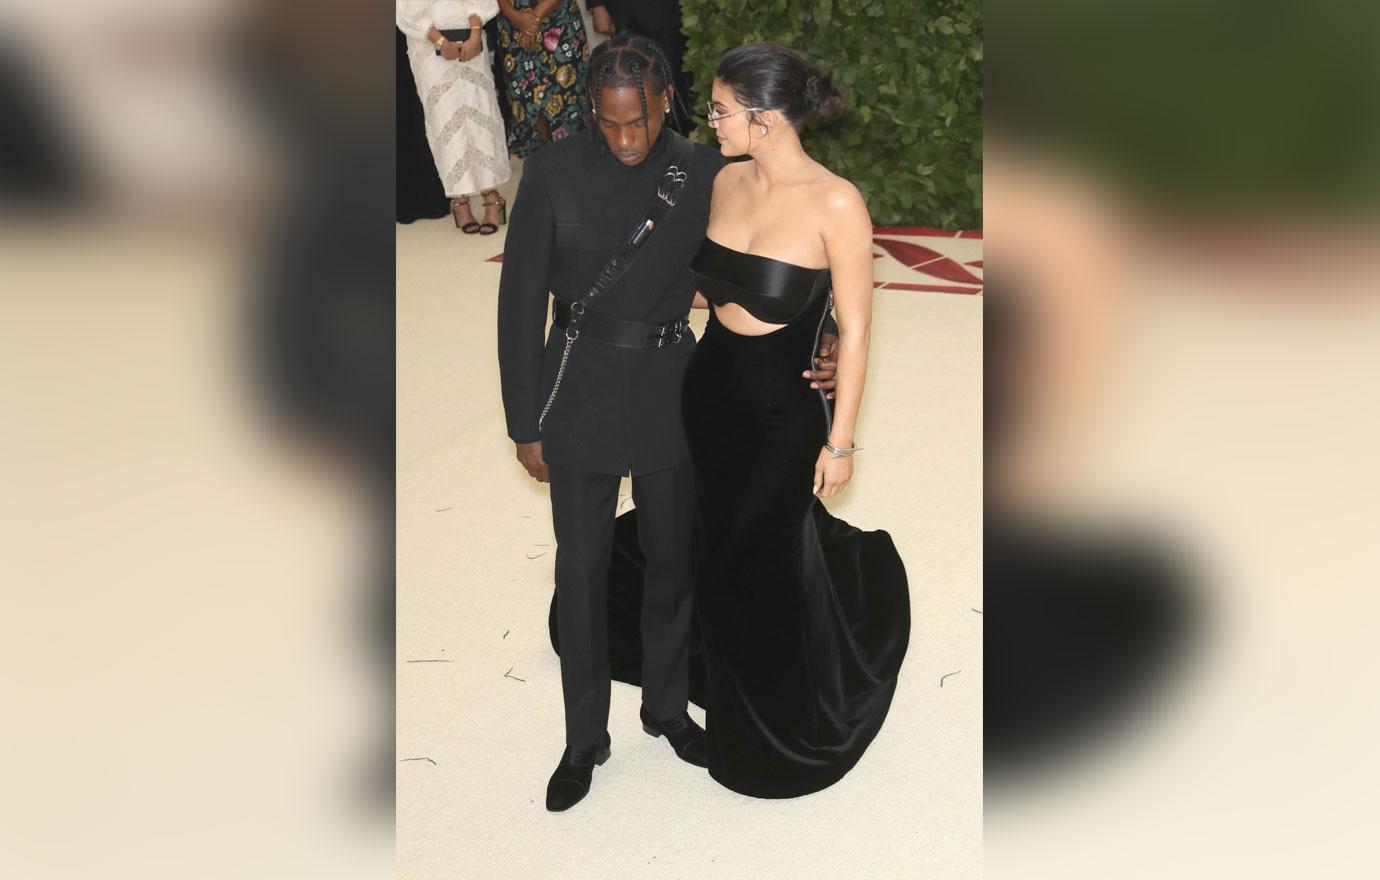 Kylie Jenner Says Her First Date With Travis Scott Was Standoffish